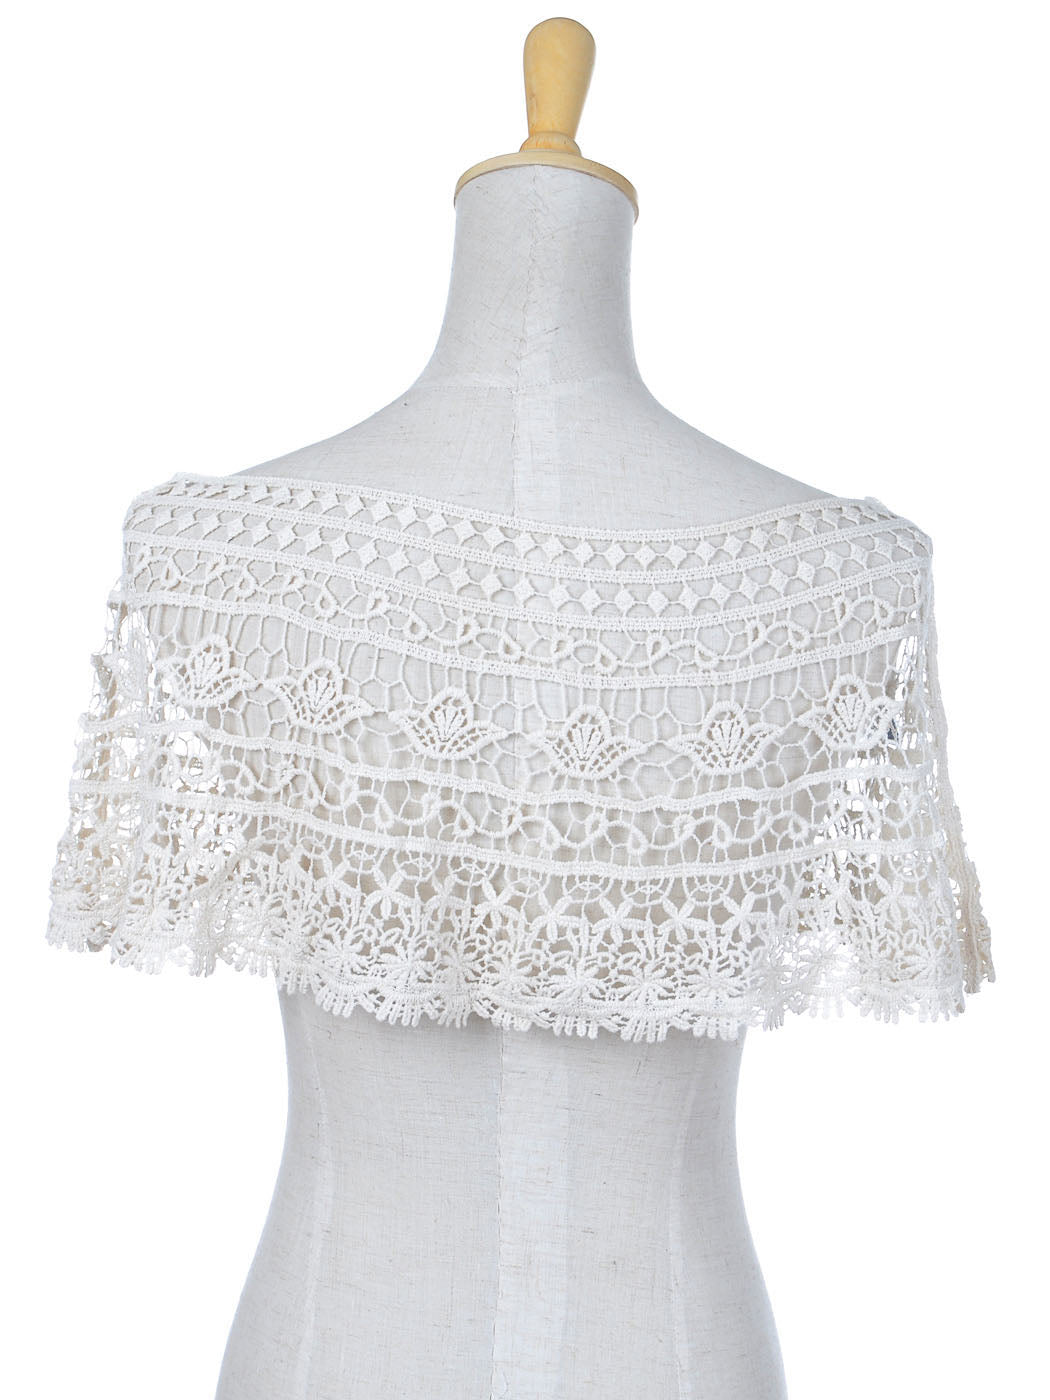 Anna-Kaci Womens Ivory White Crochet Floral Flower Crop Cover Up Shawl